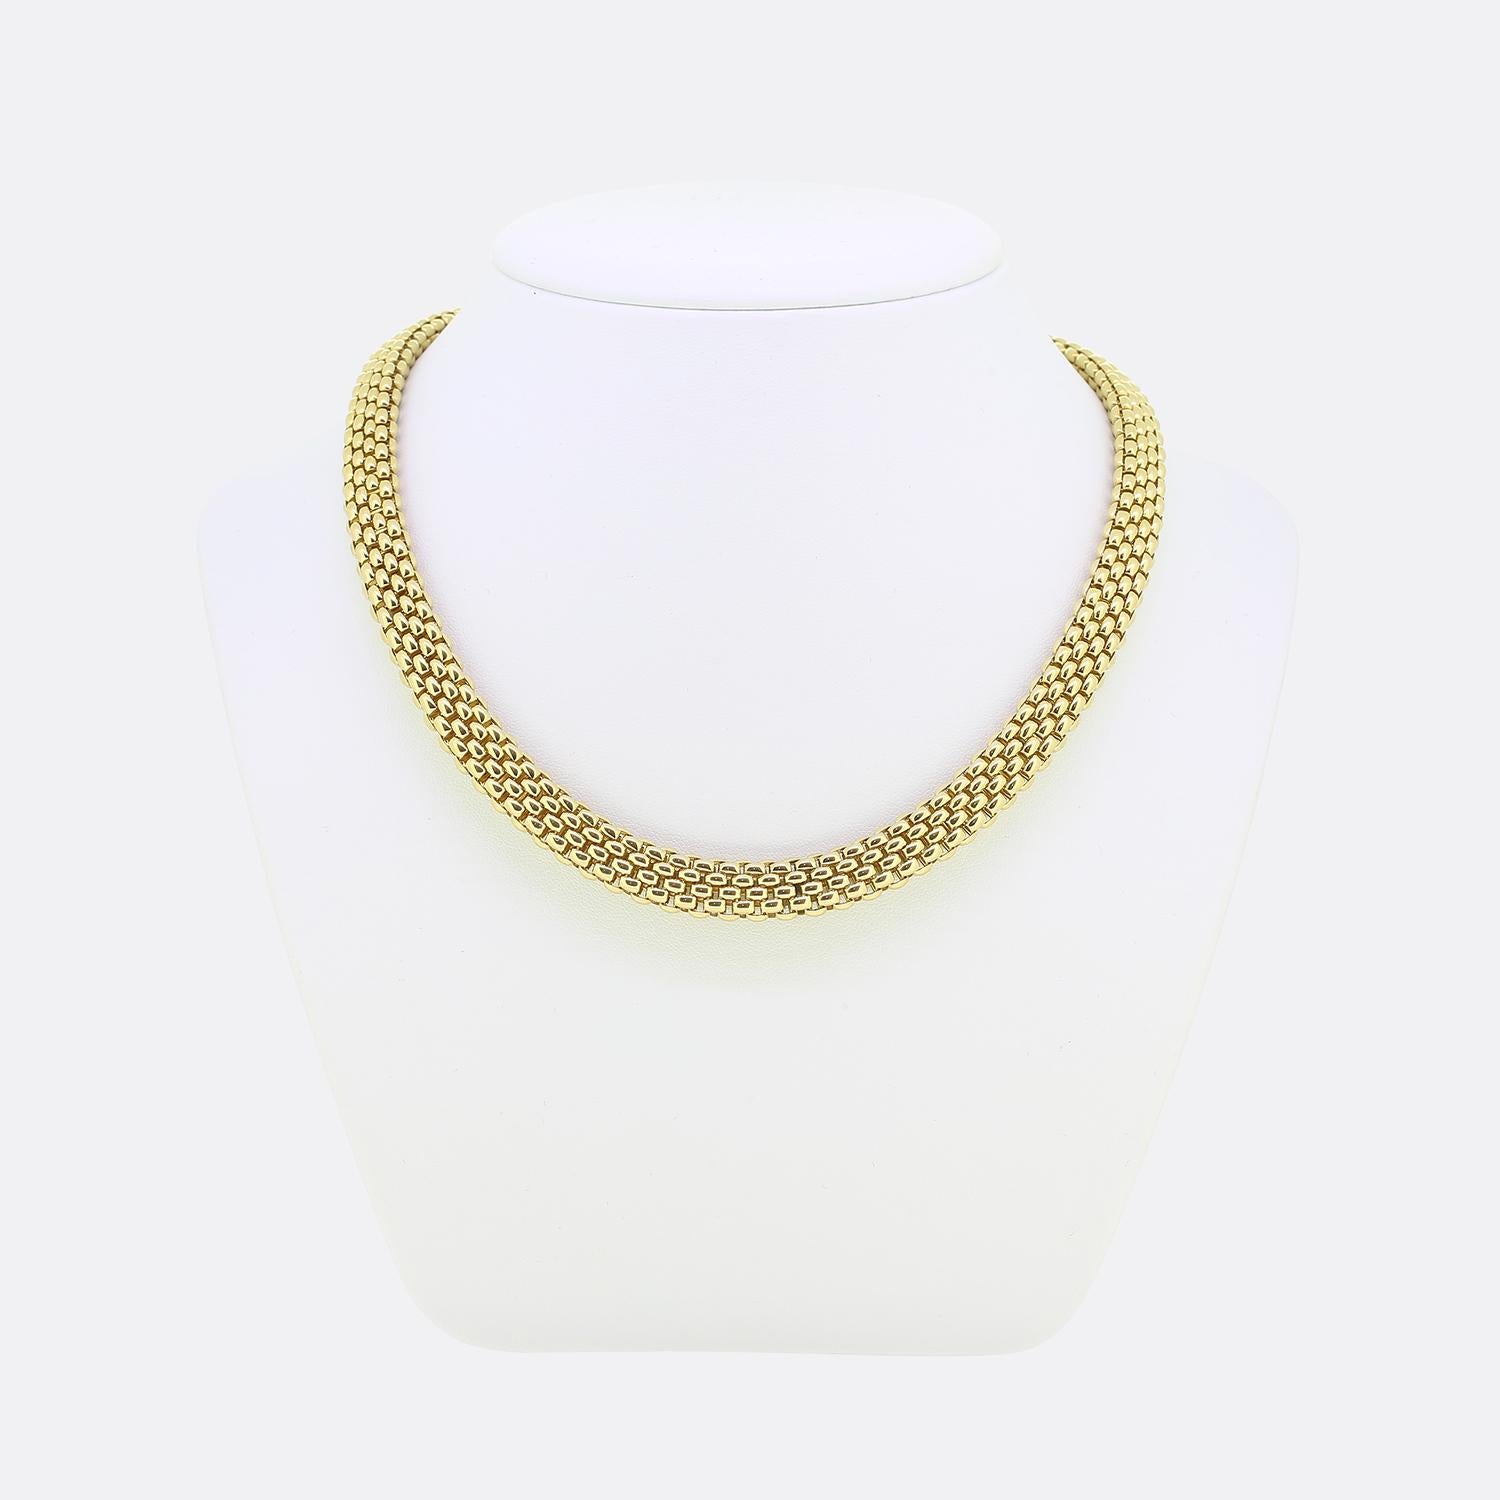 Here we have an 18ct yellow gold chain necklace from the luxury jewellery designer Fope. The necklace forms part of the Profili Collection and is an impressive 65.9 grams in weight. The Profili Collection's signature woven mesh link design exudes